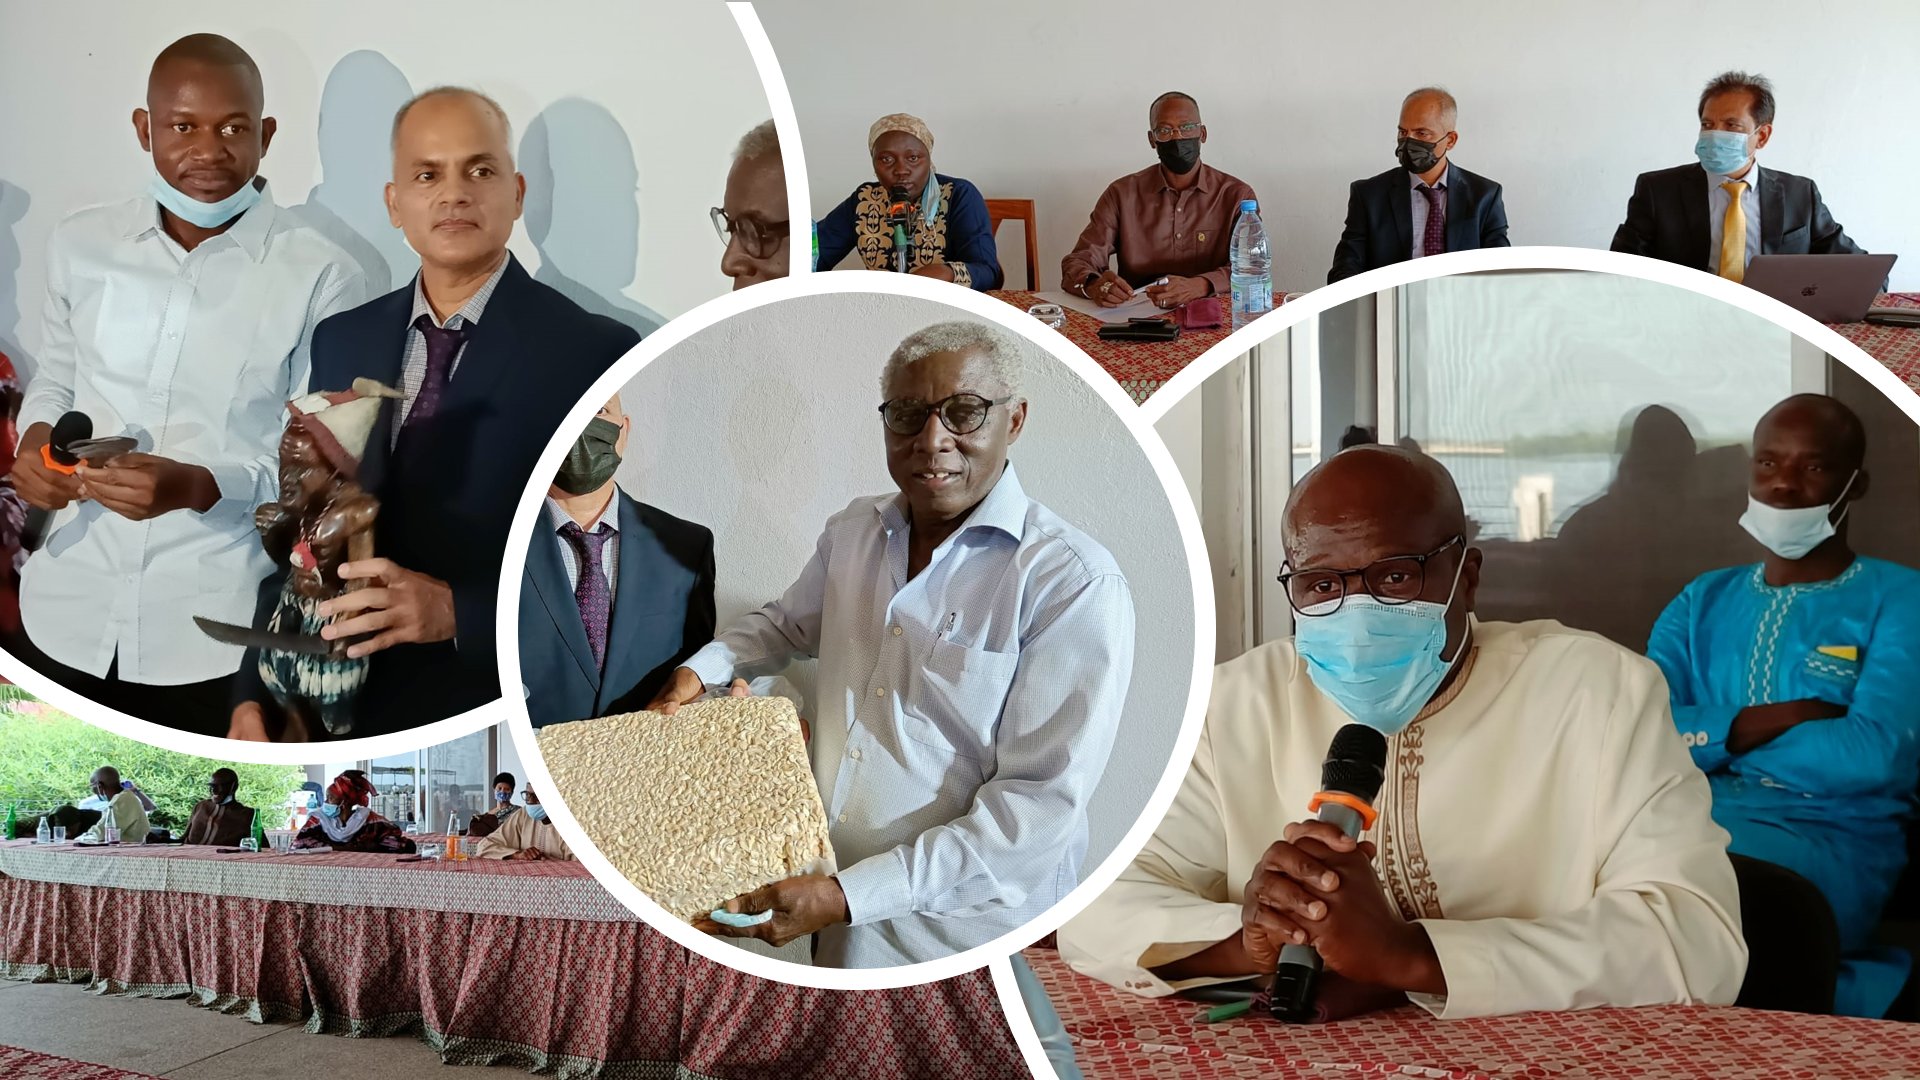 Trade promotion event was organised on 20th December 2021 at Chamber of Commerce in Ziguinchor, Casamance